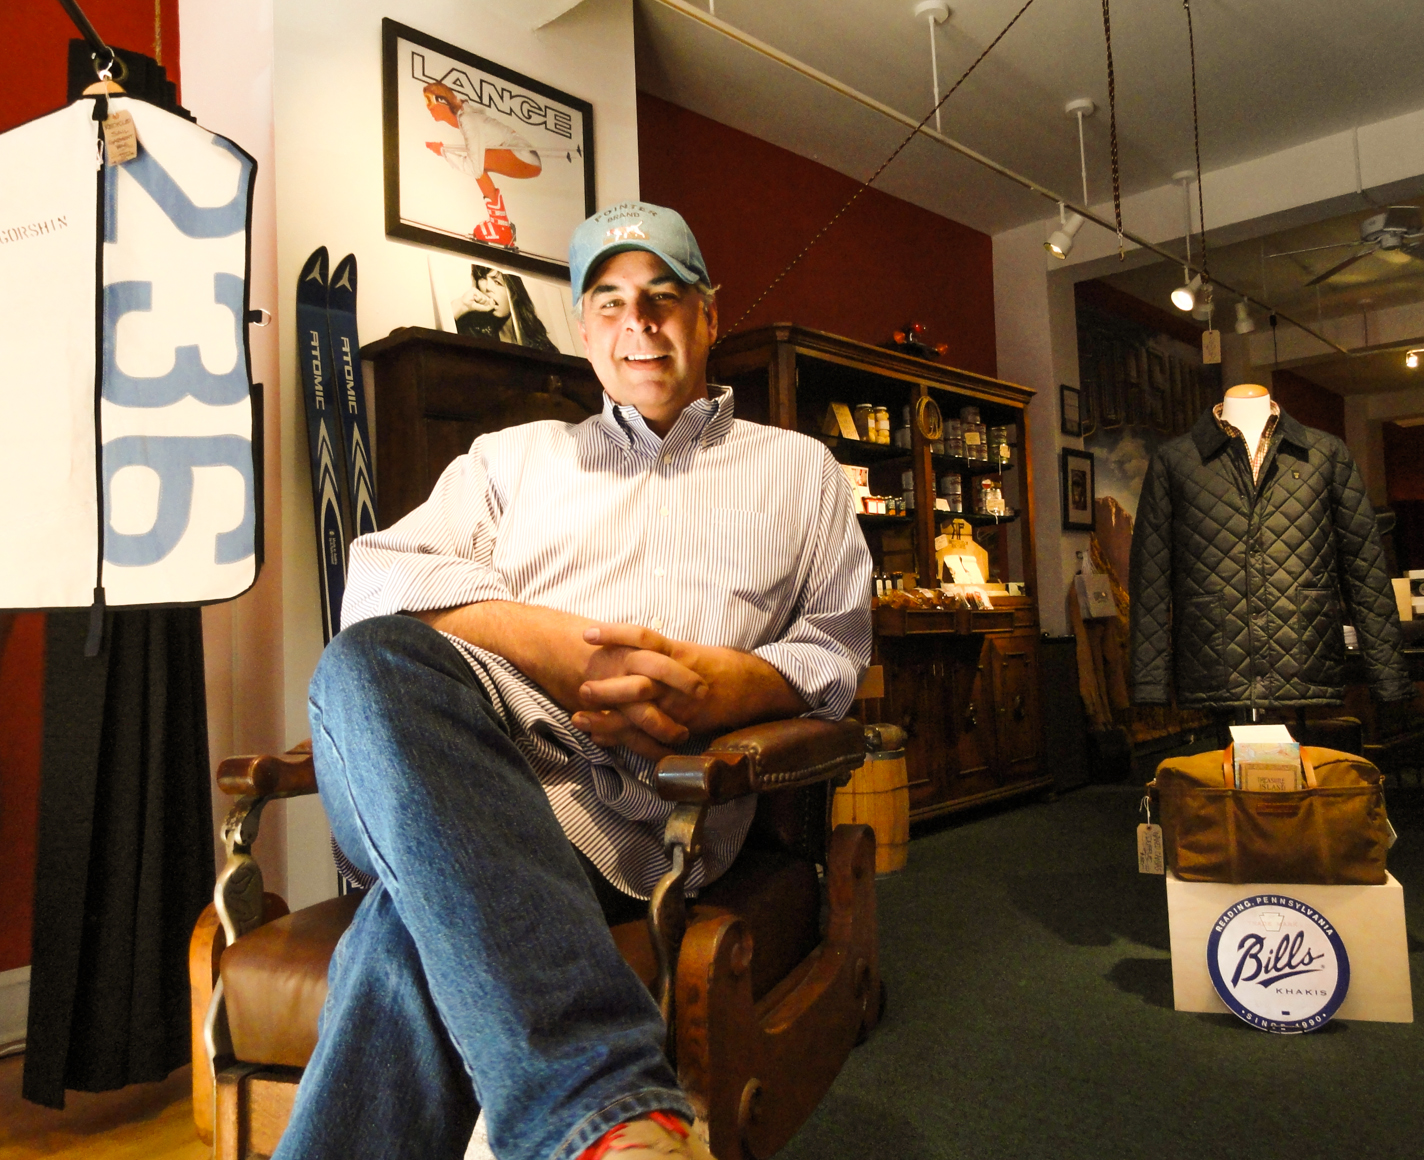 Mitch Gorshin's trading post offers a theatrical experience for shoppers. Credit: Matt Skoufalos.